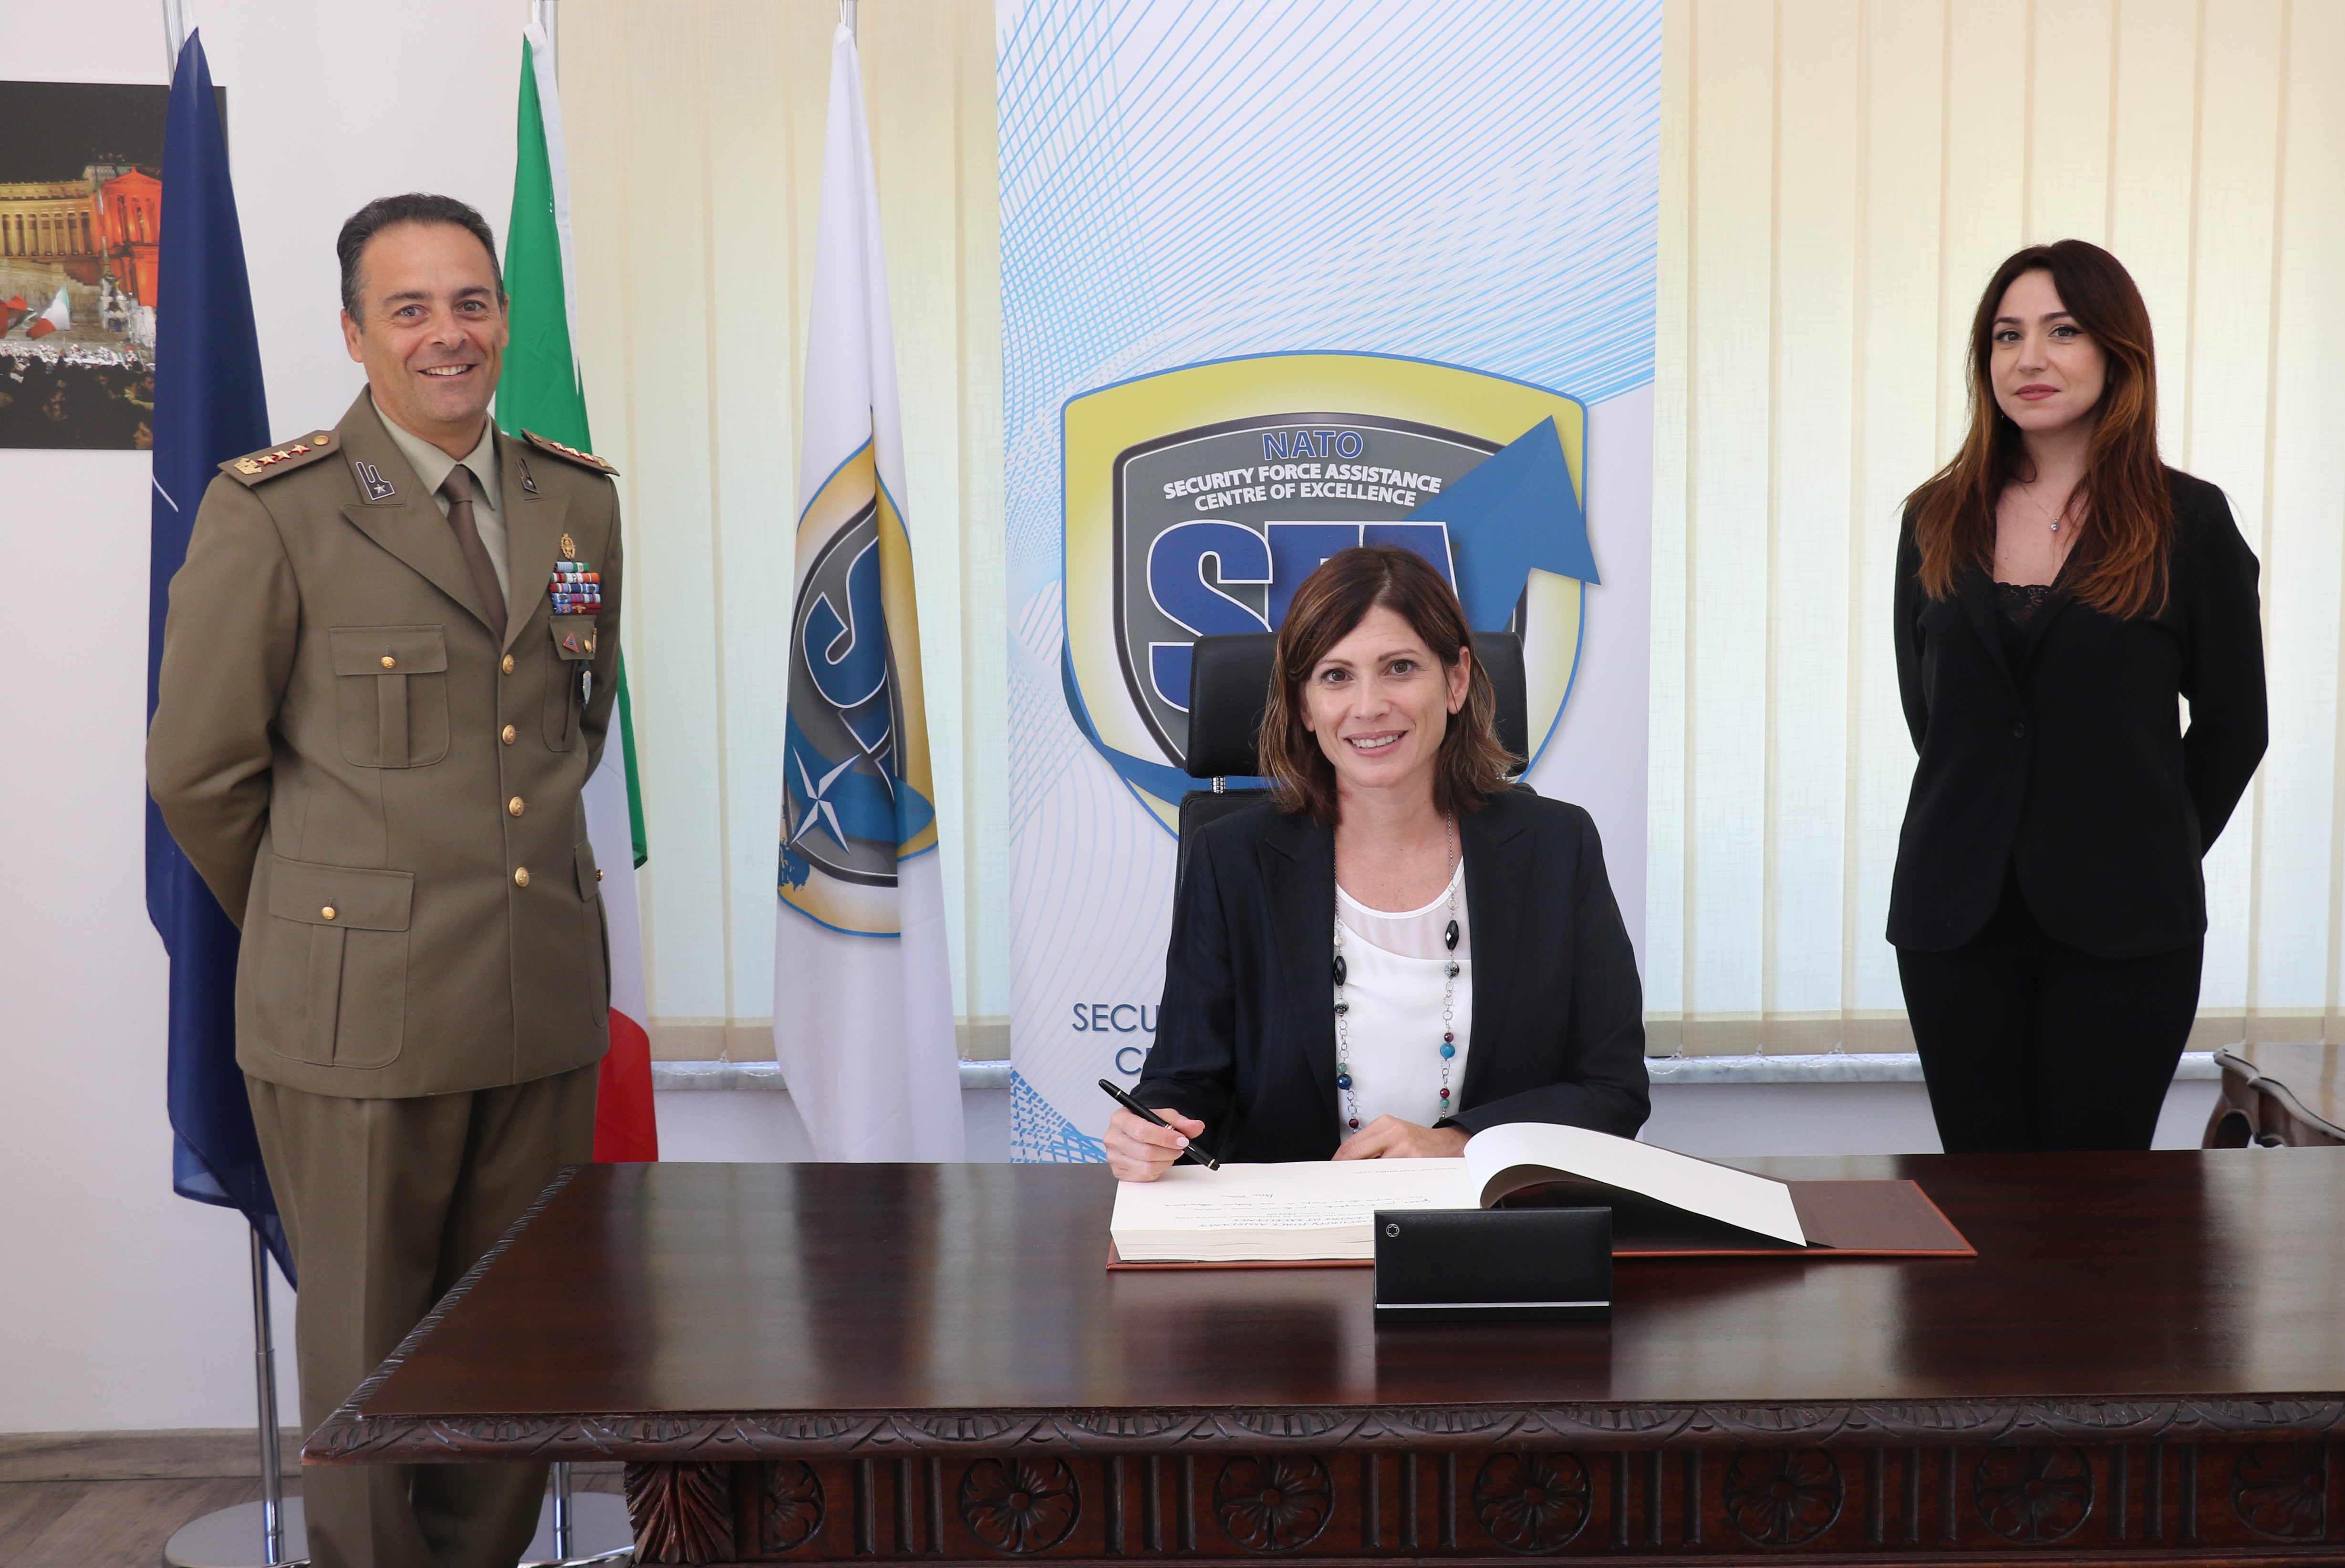 The President of WIIS Italy visits the NATO SFA COE